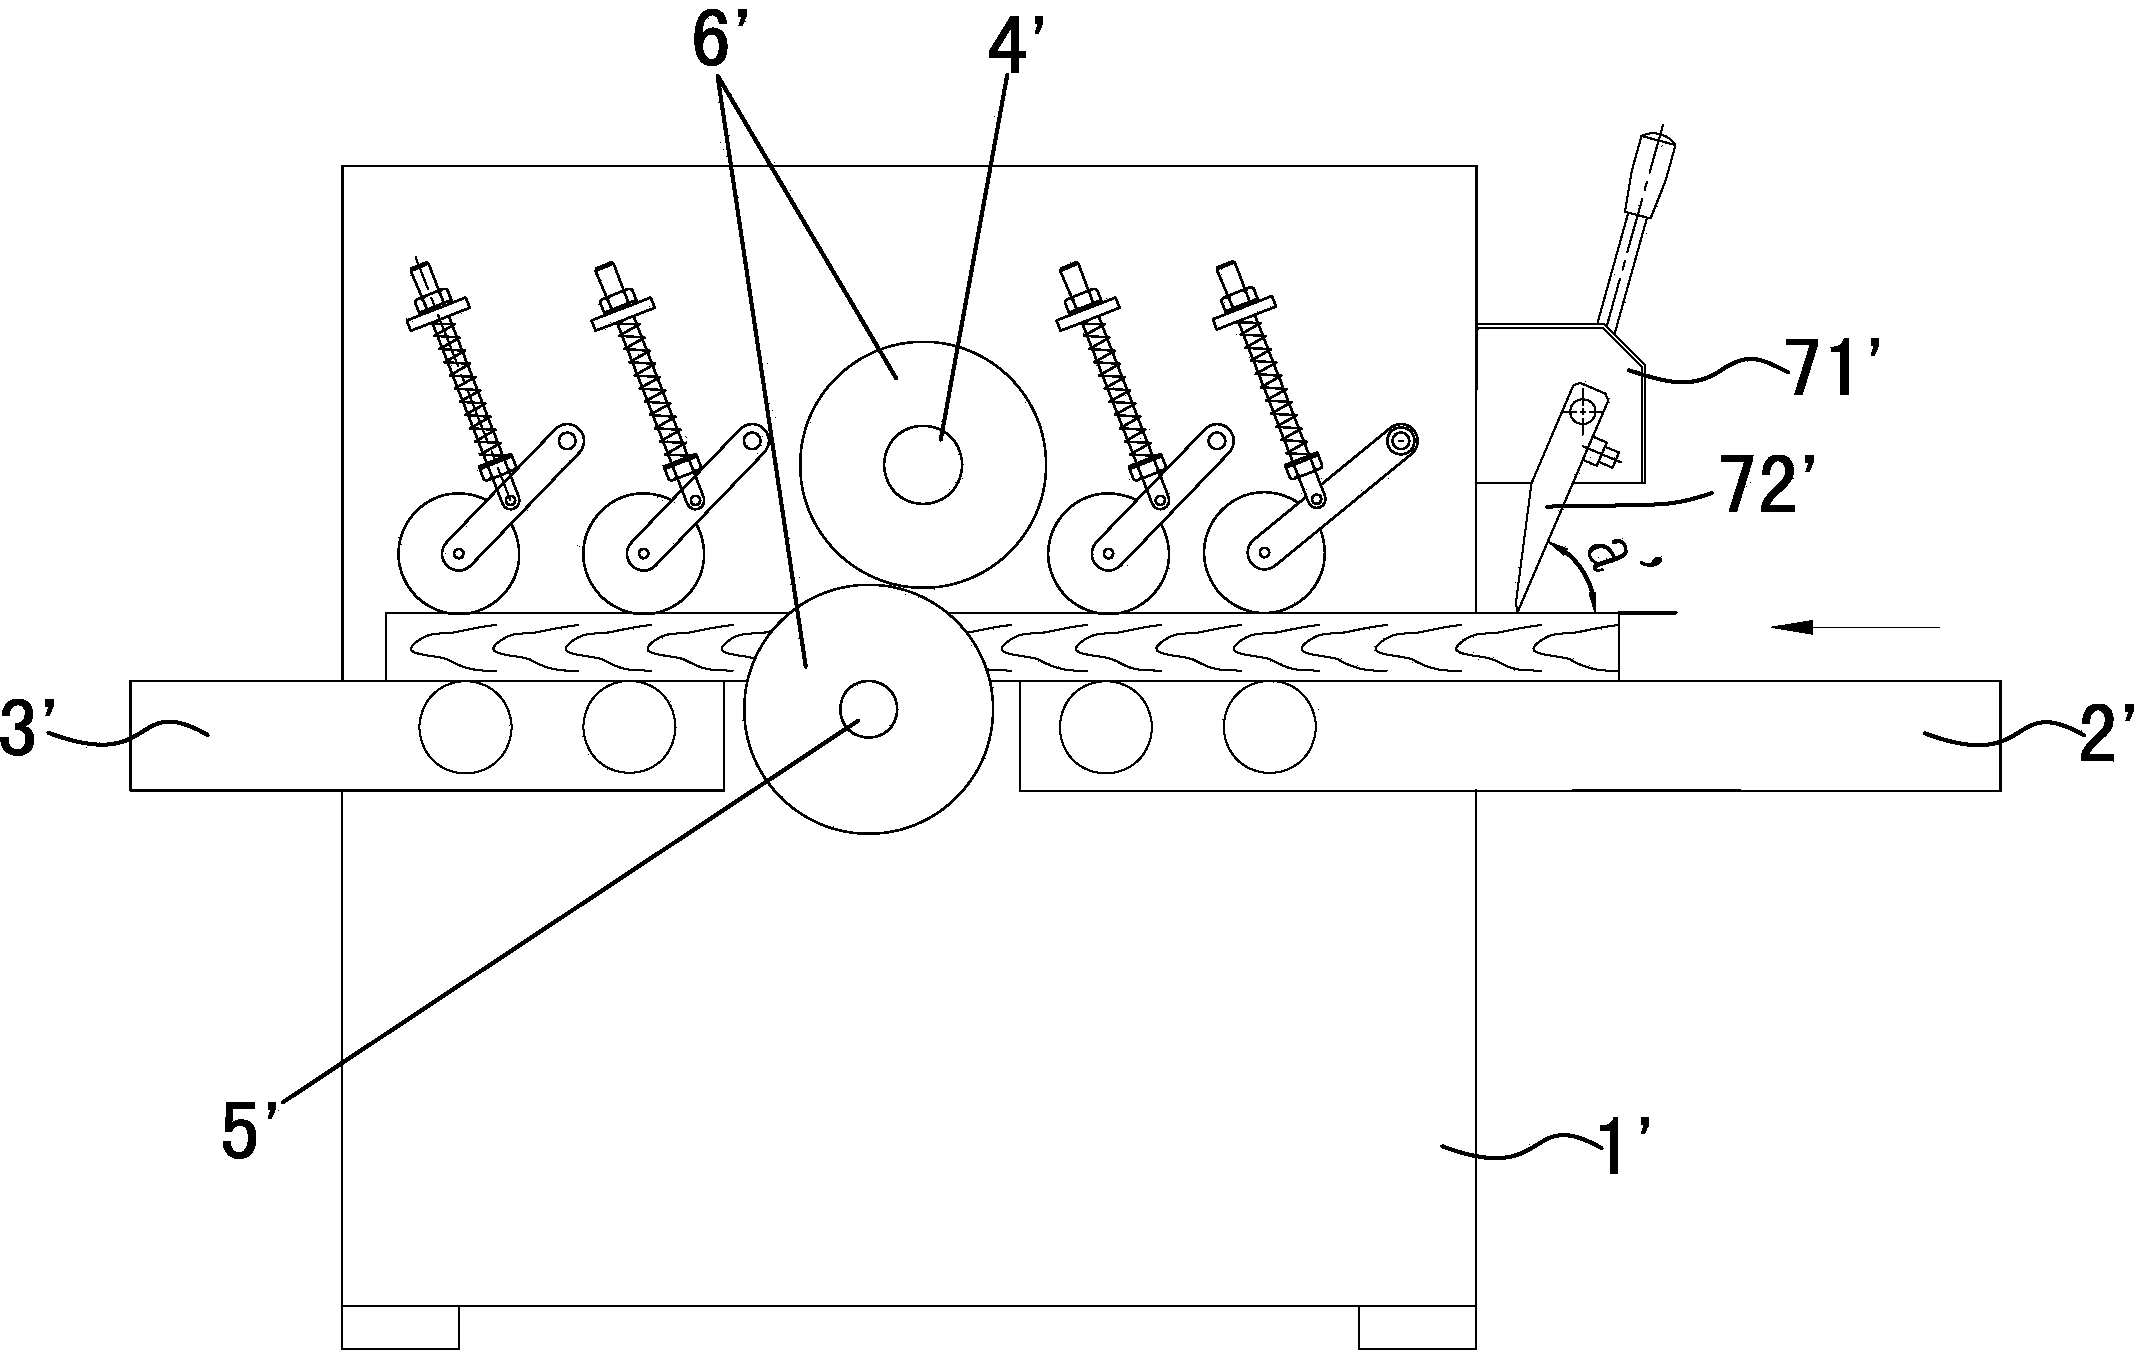 Backstop device of wood sawing machine